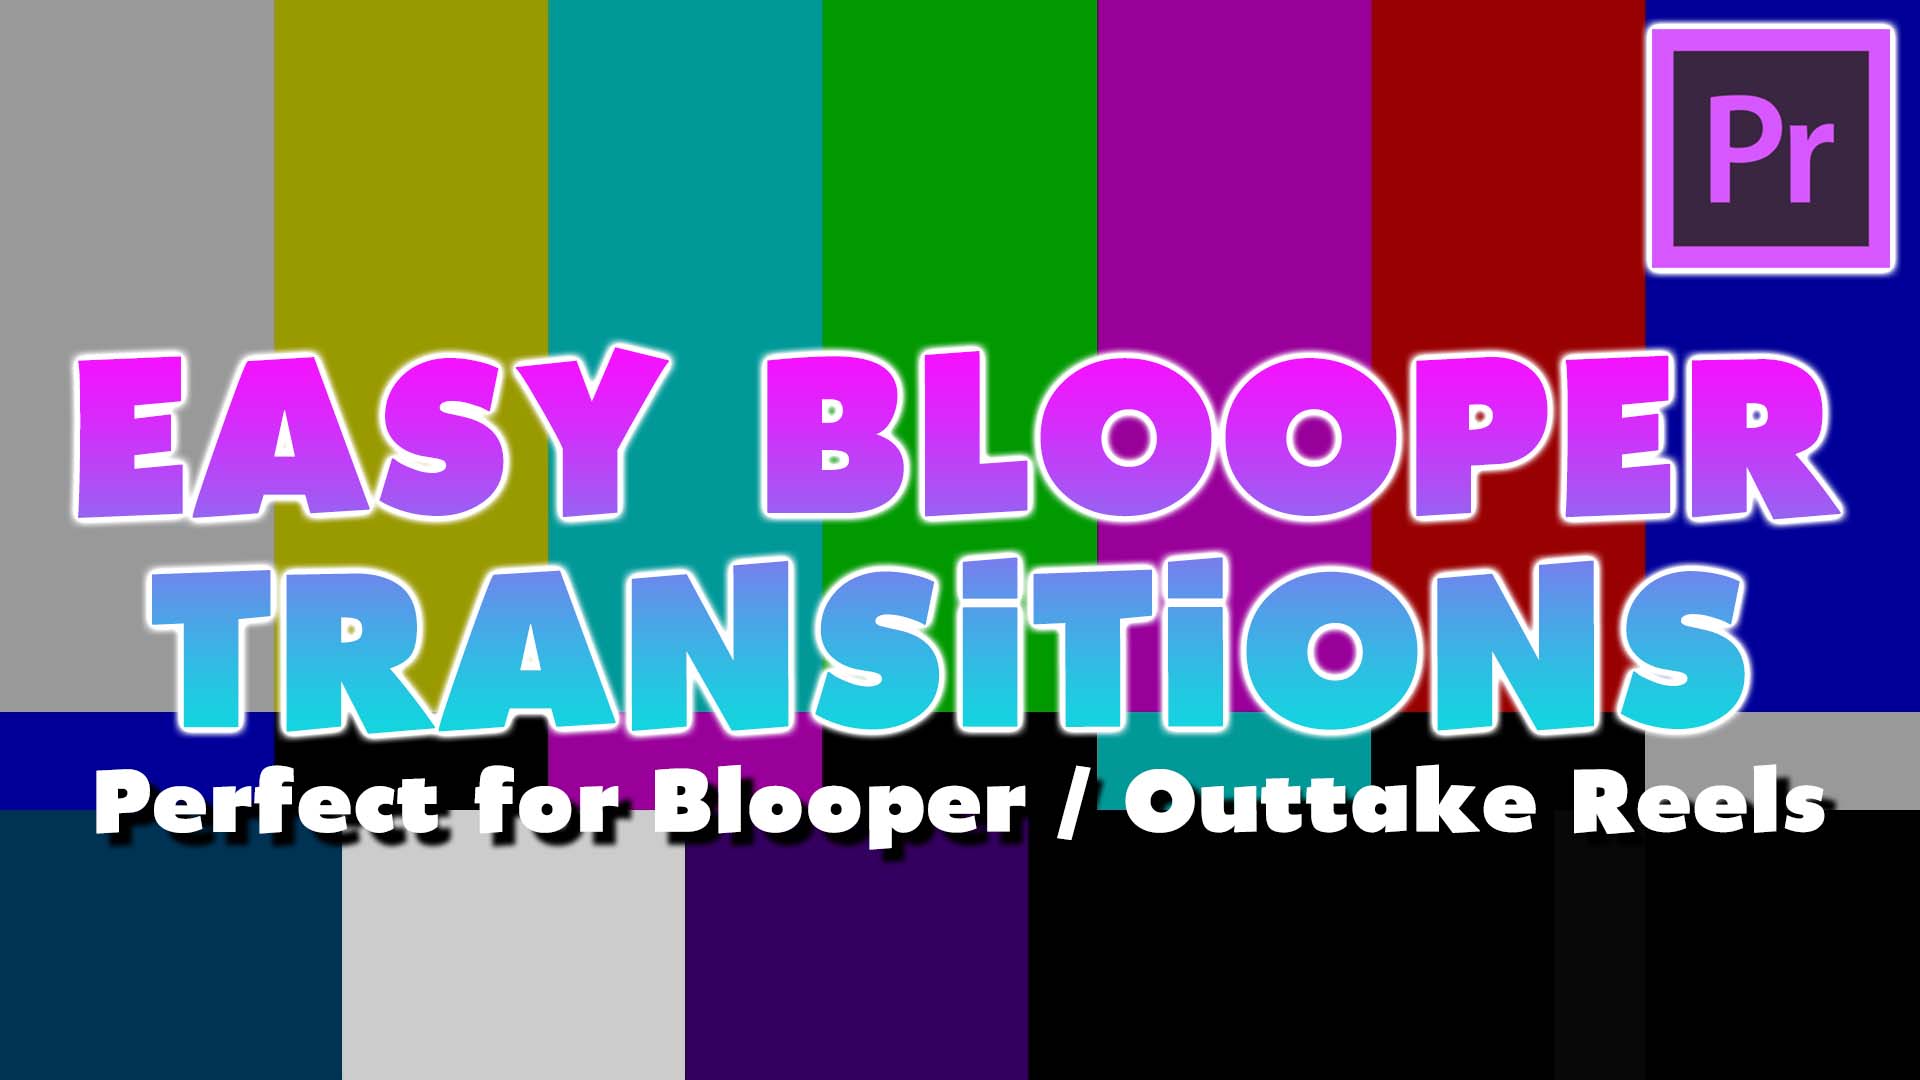 Easy Blooper Transitions in Premiere Pro